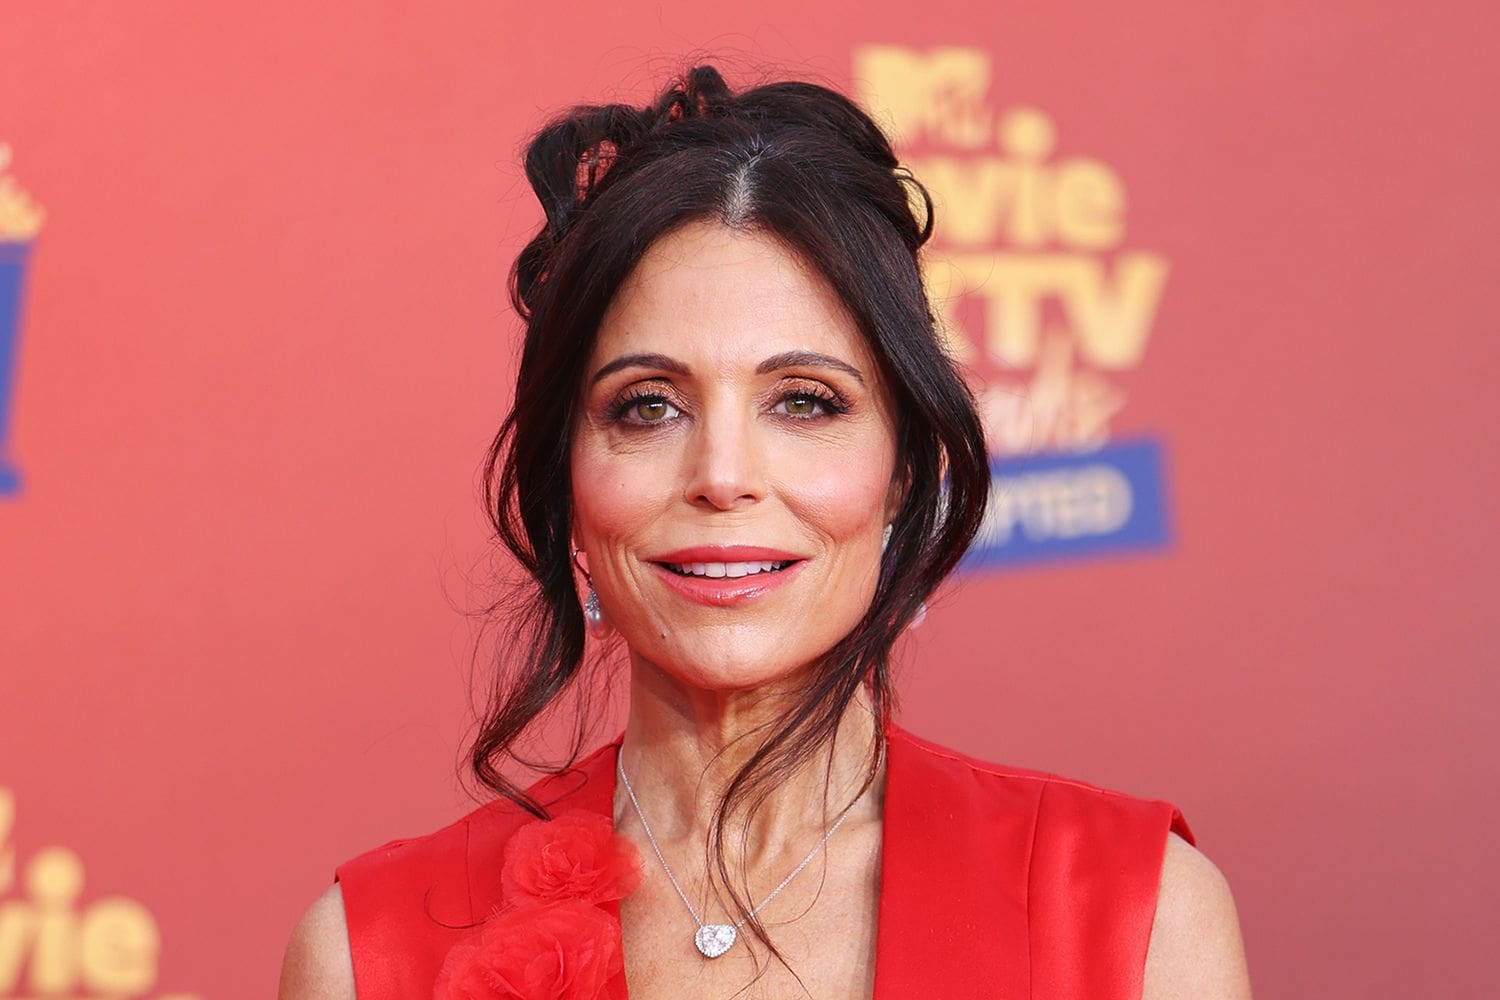 Bethenny Frankel Enlists Power Attorneys Bryan Freedman and Mark Geragos in Fight for Reality Star Protections: ‘This Is Going to Be a War’